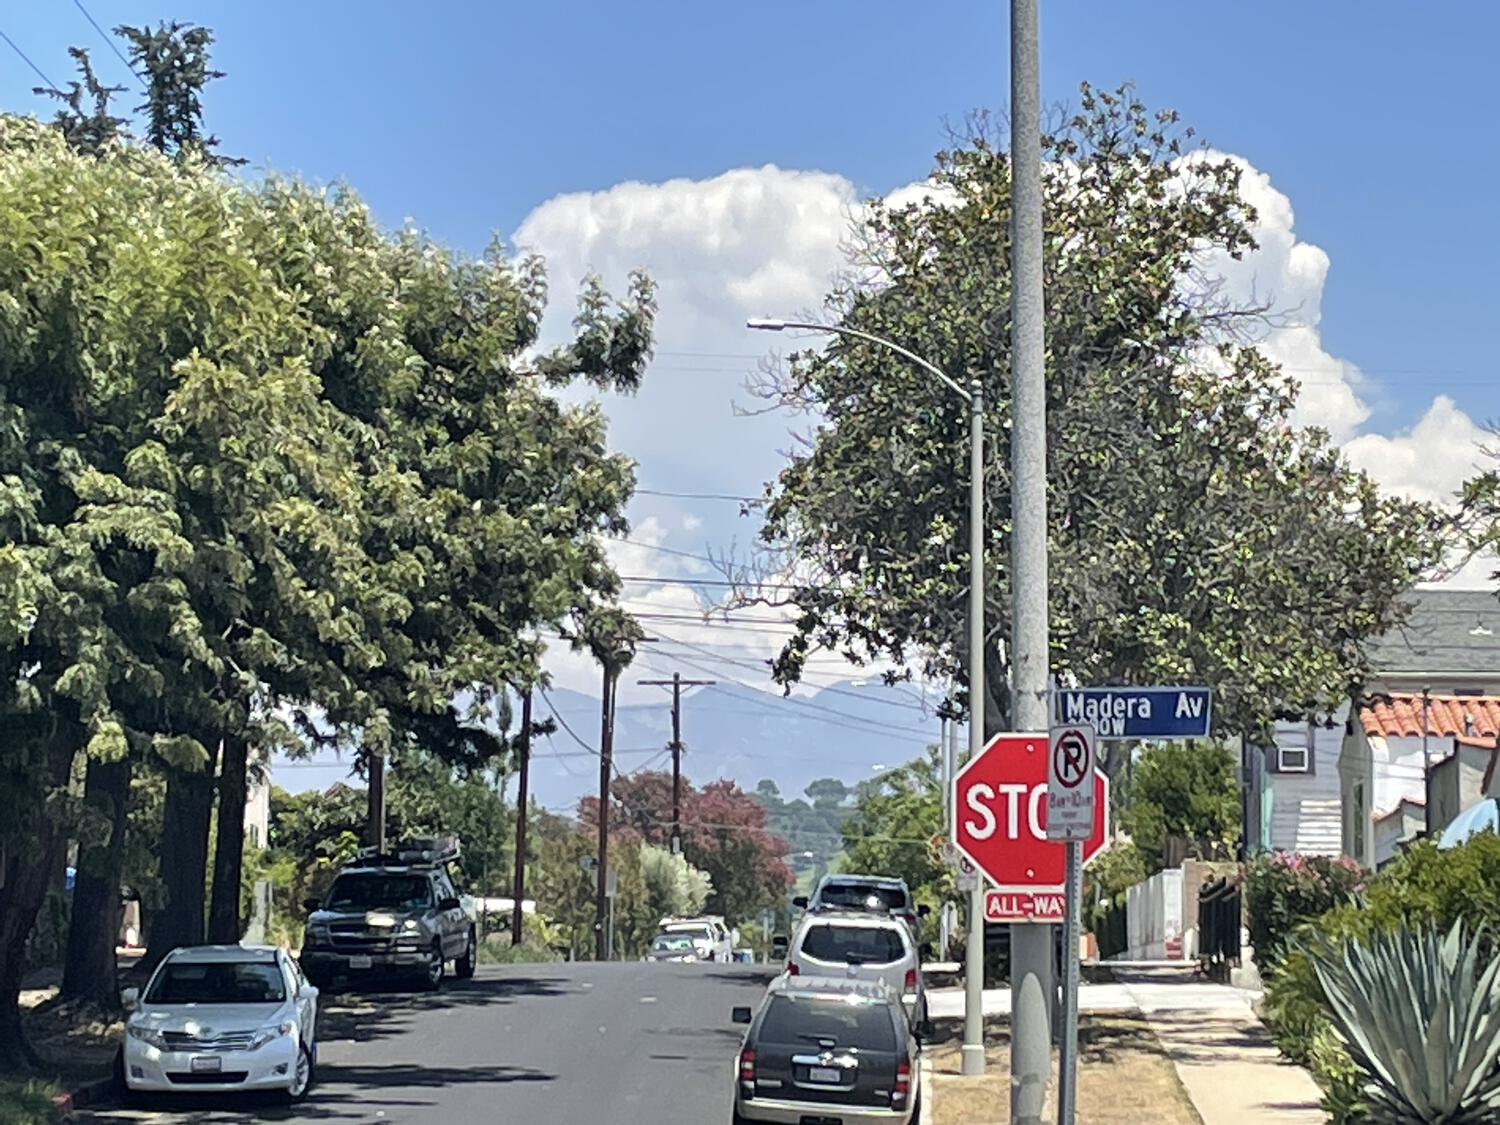 A bucolic Los Angeles street with puffy clouds and mountains in the background